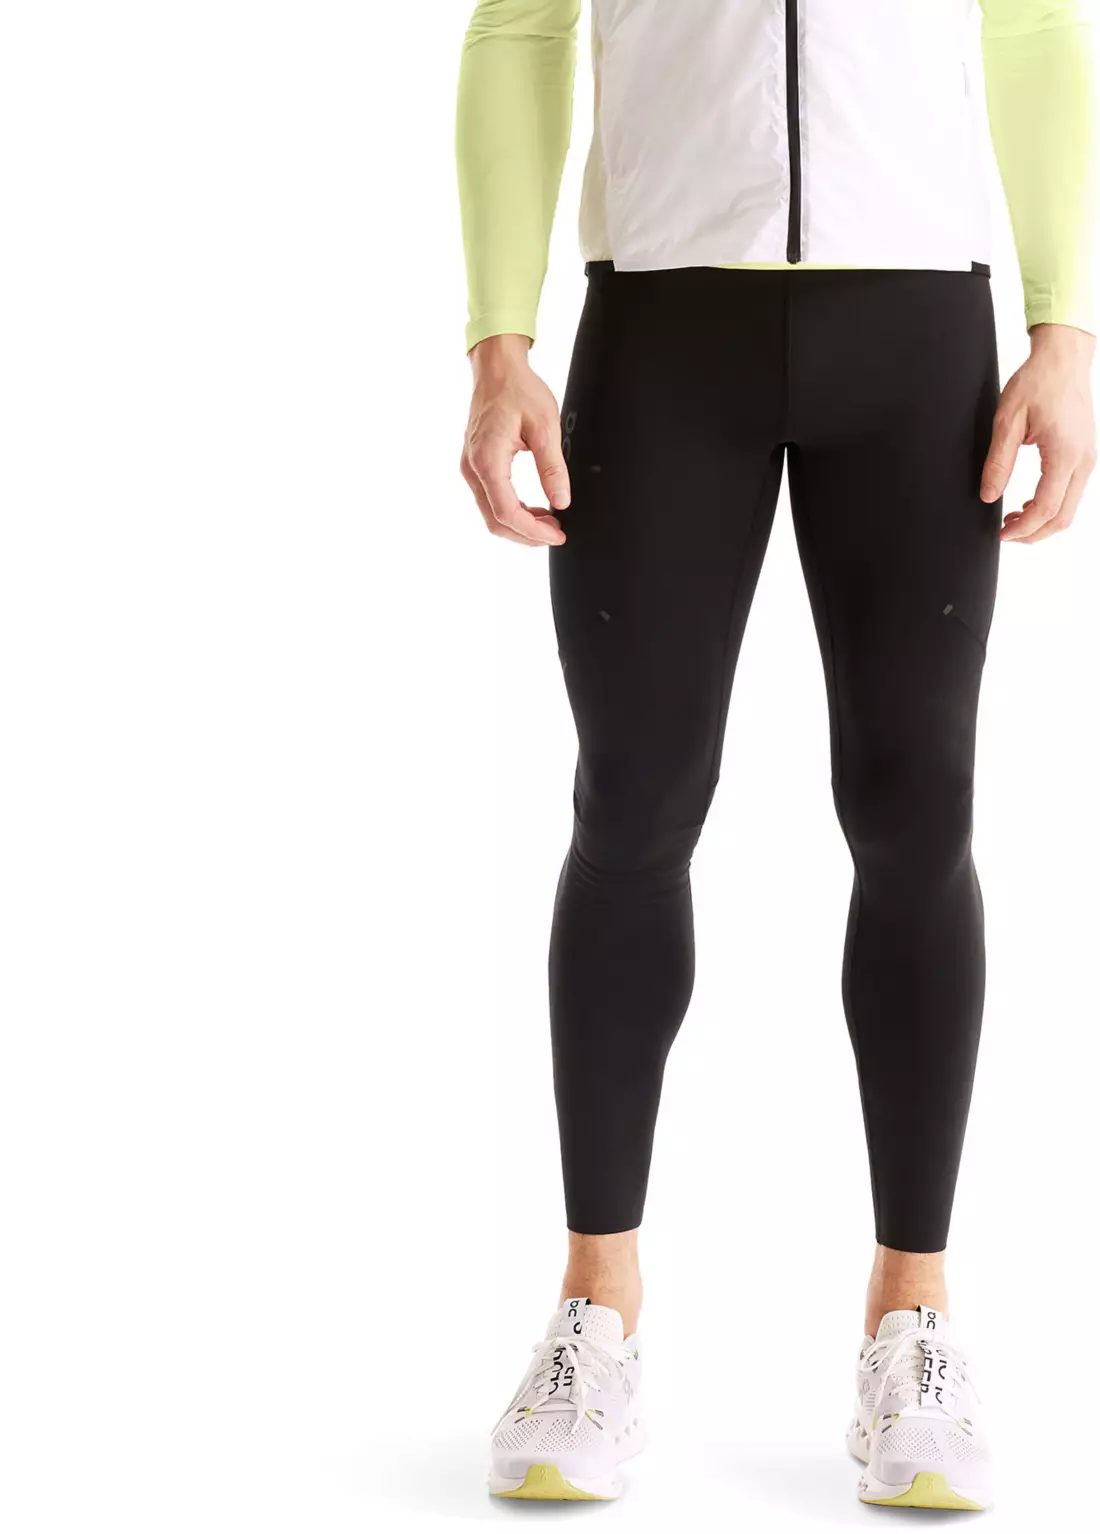 Running Room Men's Extreme Wind Front Run Tights